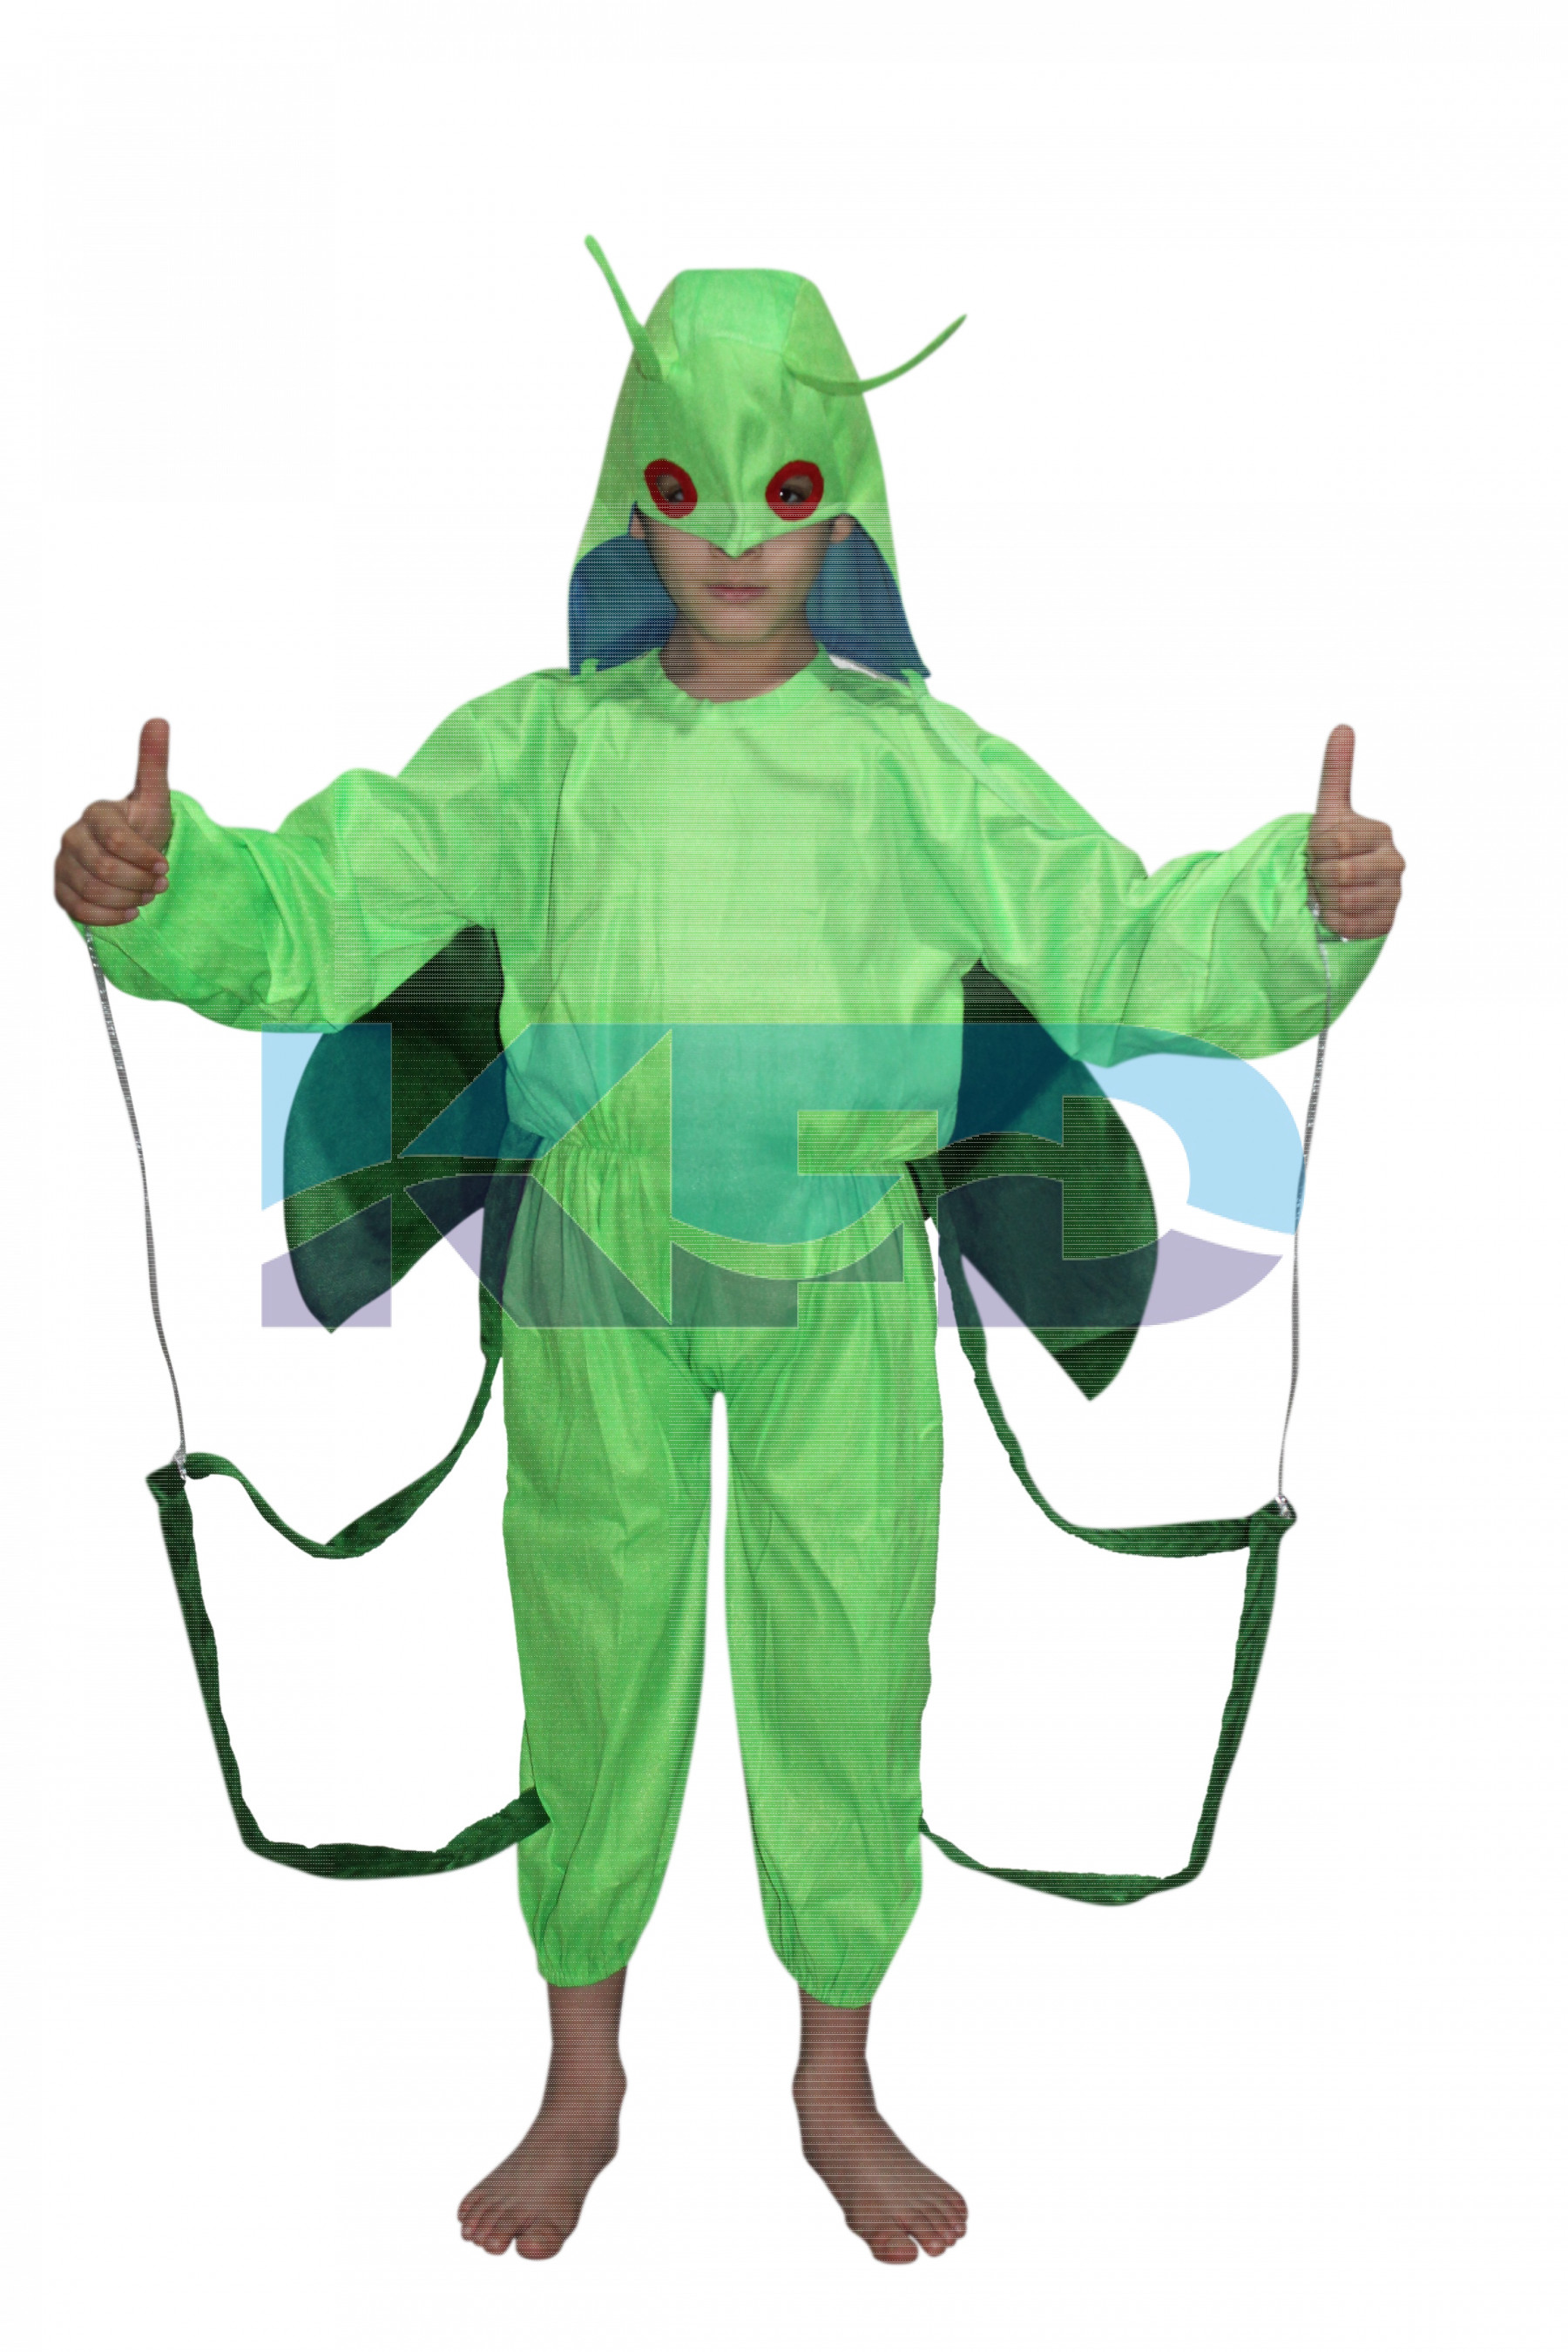 Grasshopper Insect Costume For Kids School Annual function Theme Party/Functions